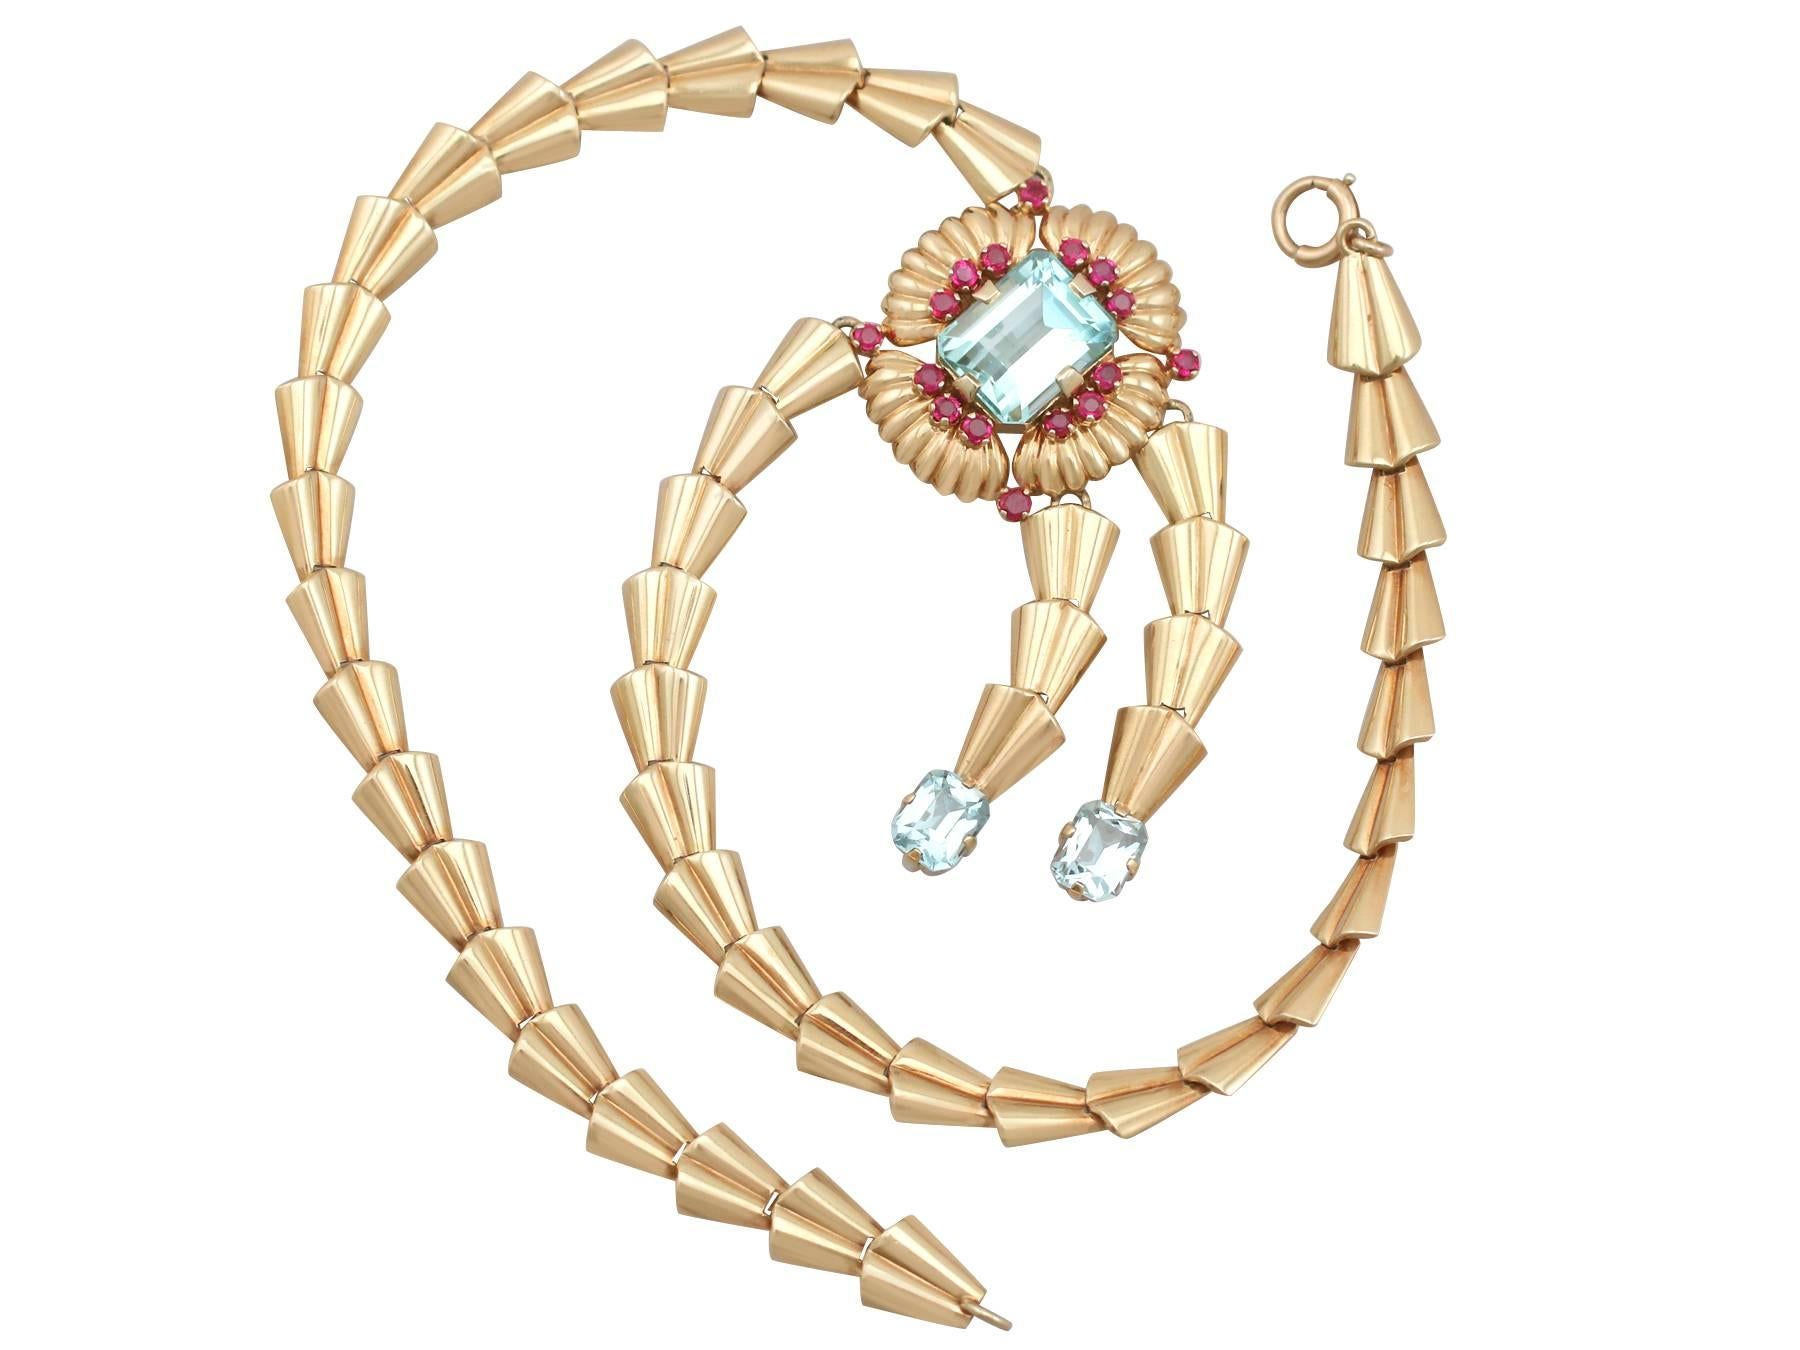 A stunning vintage Art Deco 15.84 Ct aquamarine and 1.28 Ct ruby, 14k yellow gold necklace by Tiffany & Co; part of our diverse gemstone jewelry collections.

This stunning, fine and impressive Tiffany & Co. necklace has been crafted in 14k yellow